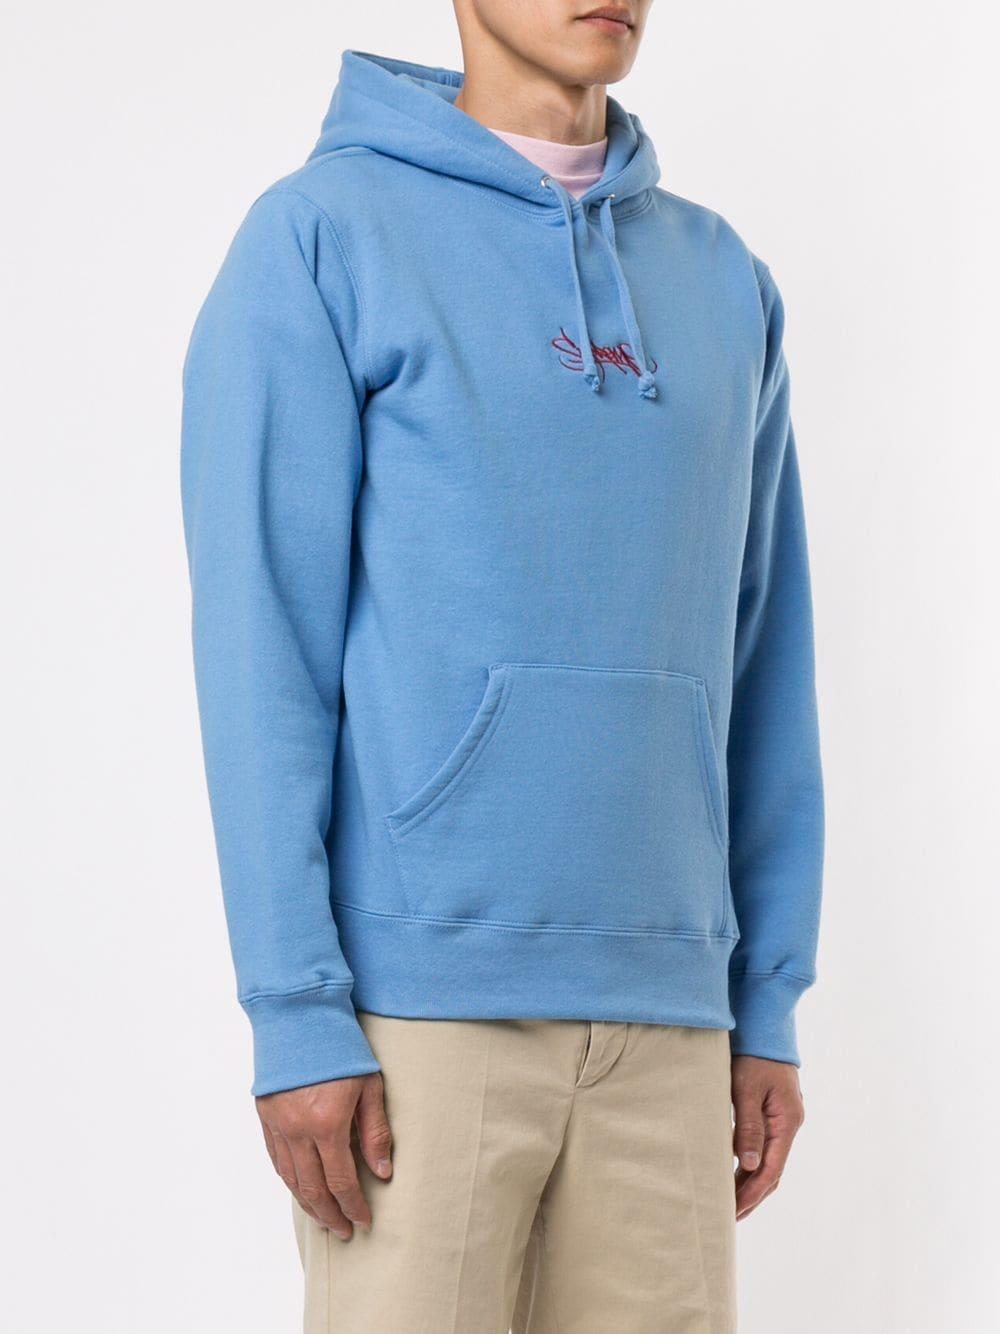 Supreme Tag Logo Hoodie in Real Blue (Blue) for Men - Lyst